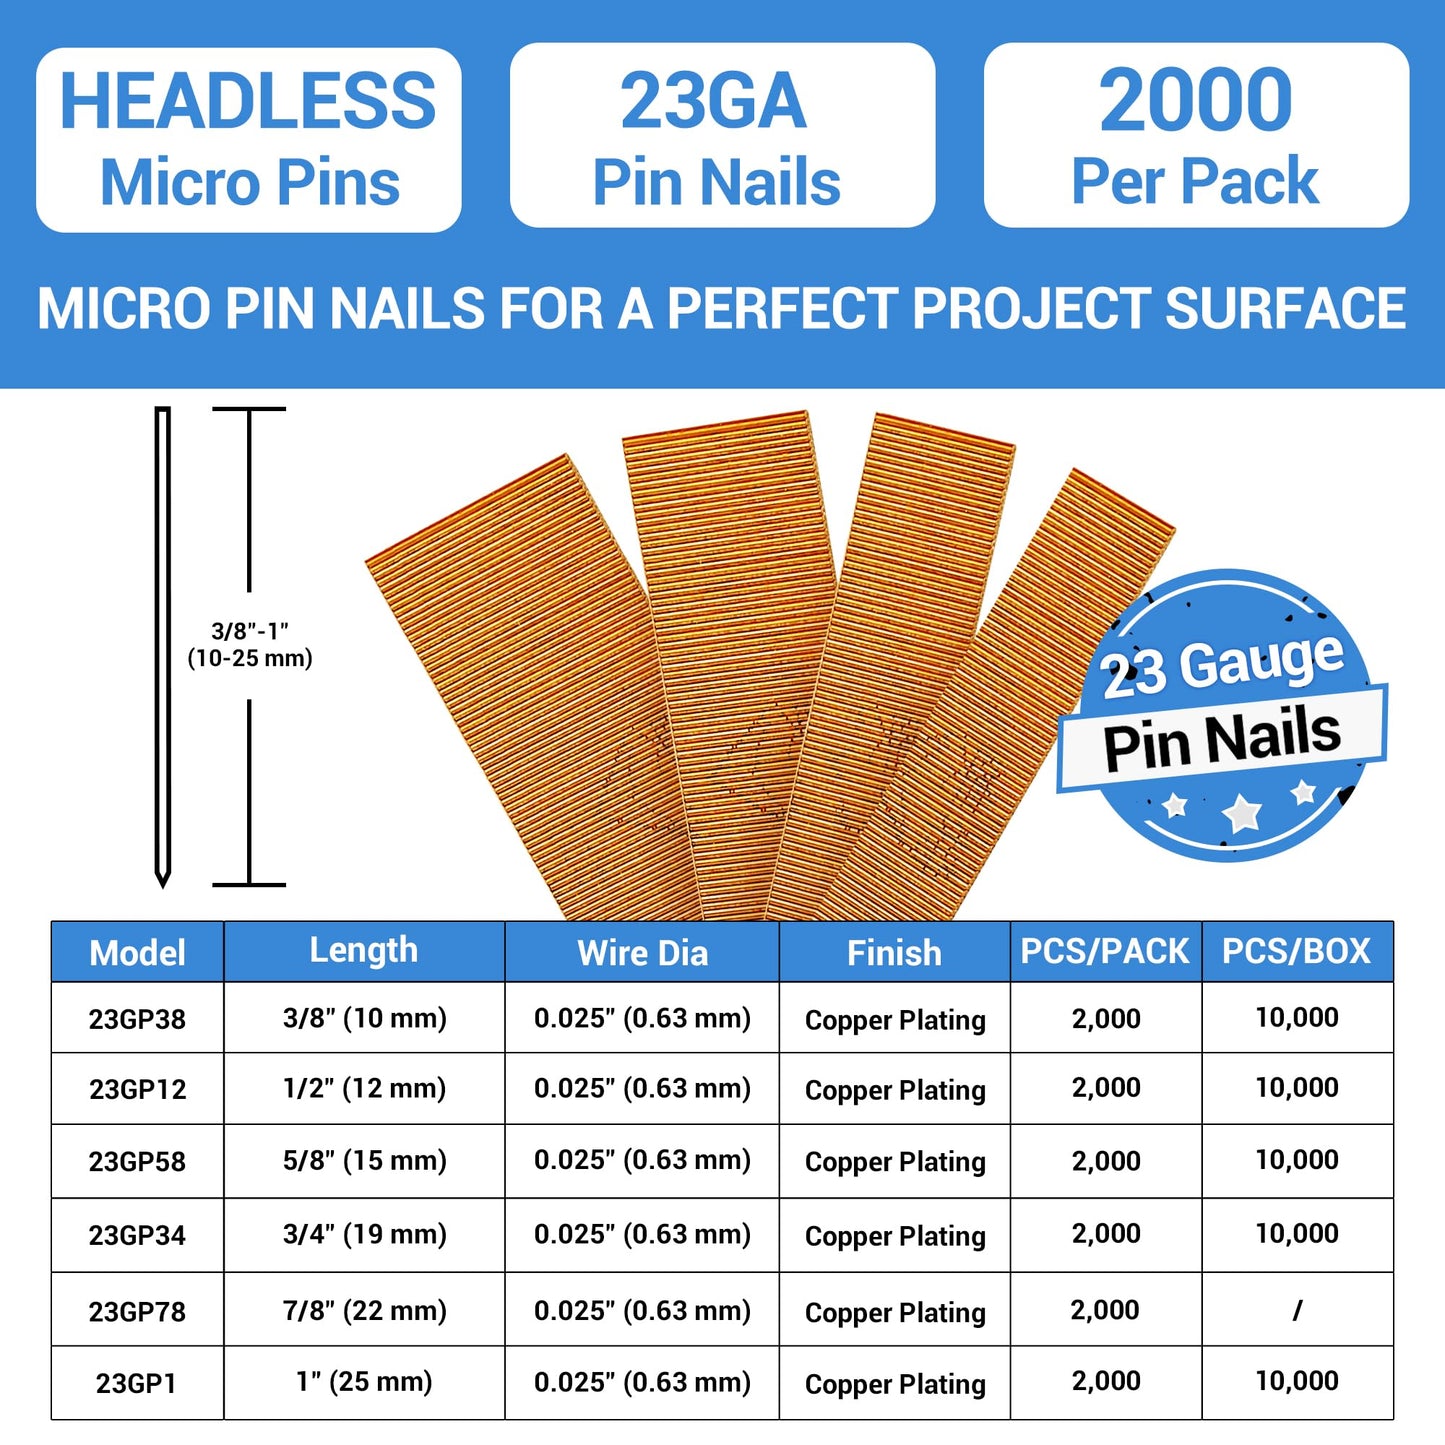 meite 23 Gauge Pin Nails, 7/8-Inch Micro Headless Pins for Pin Nailer - Copper Plated Pins Nails for Nail Gun, Ideal for Fine Woodworking and Trim